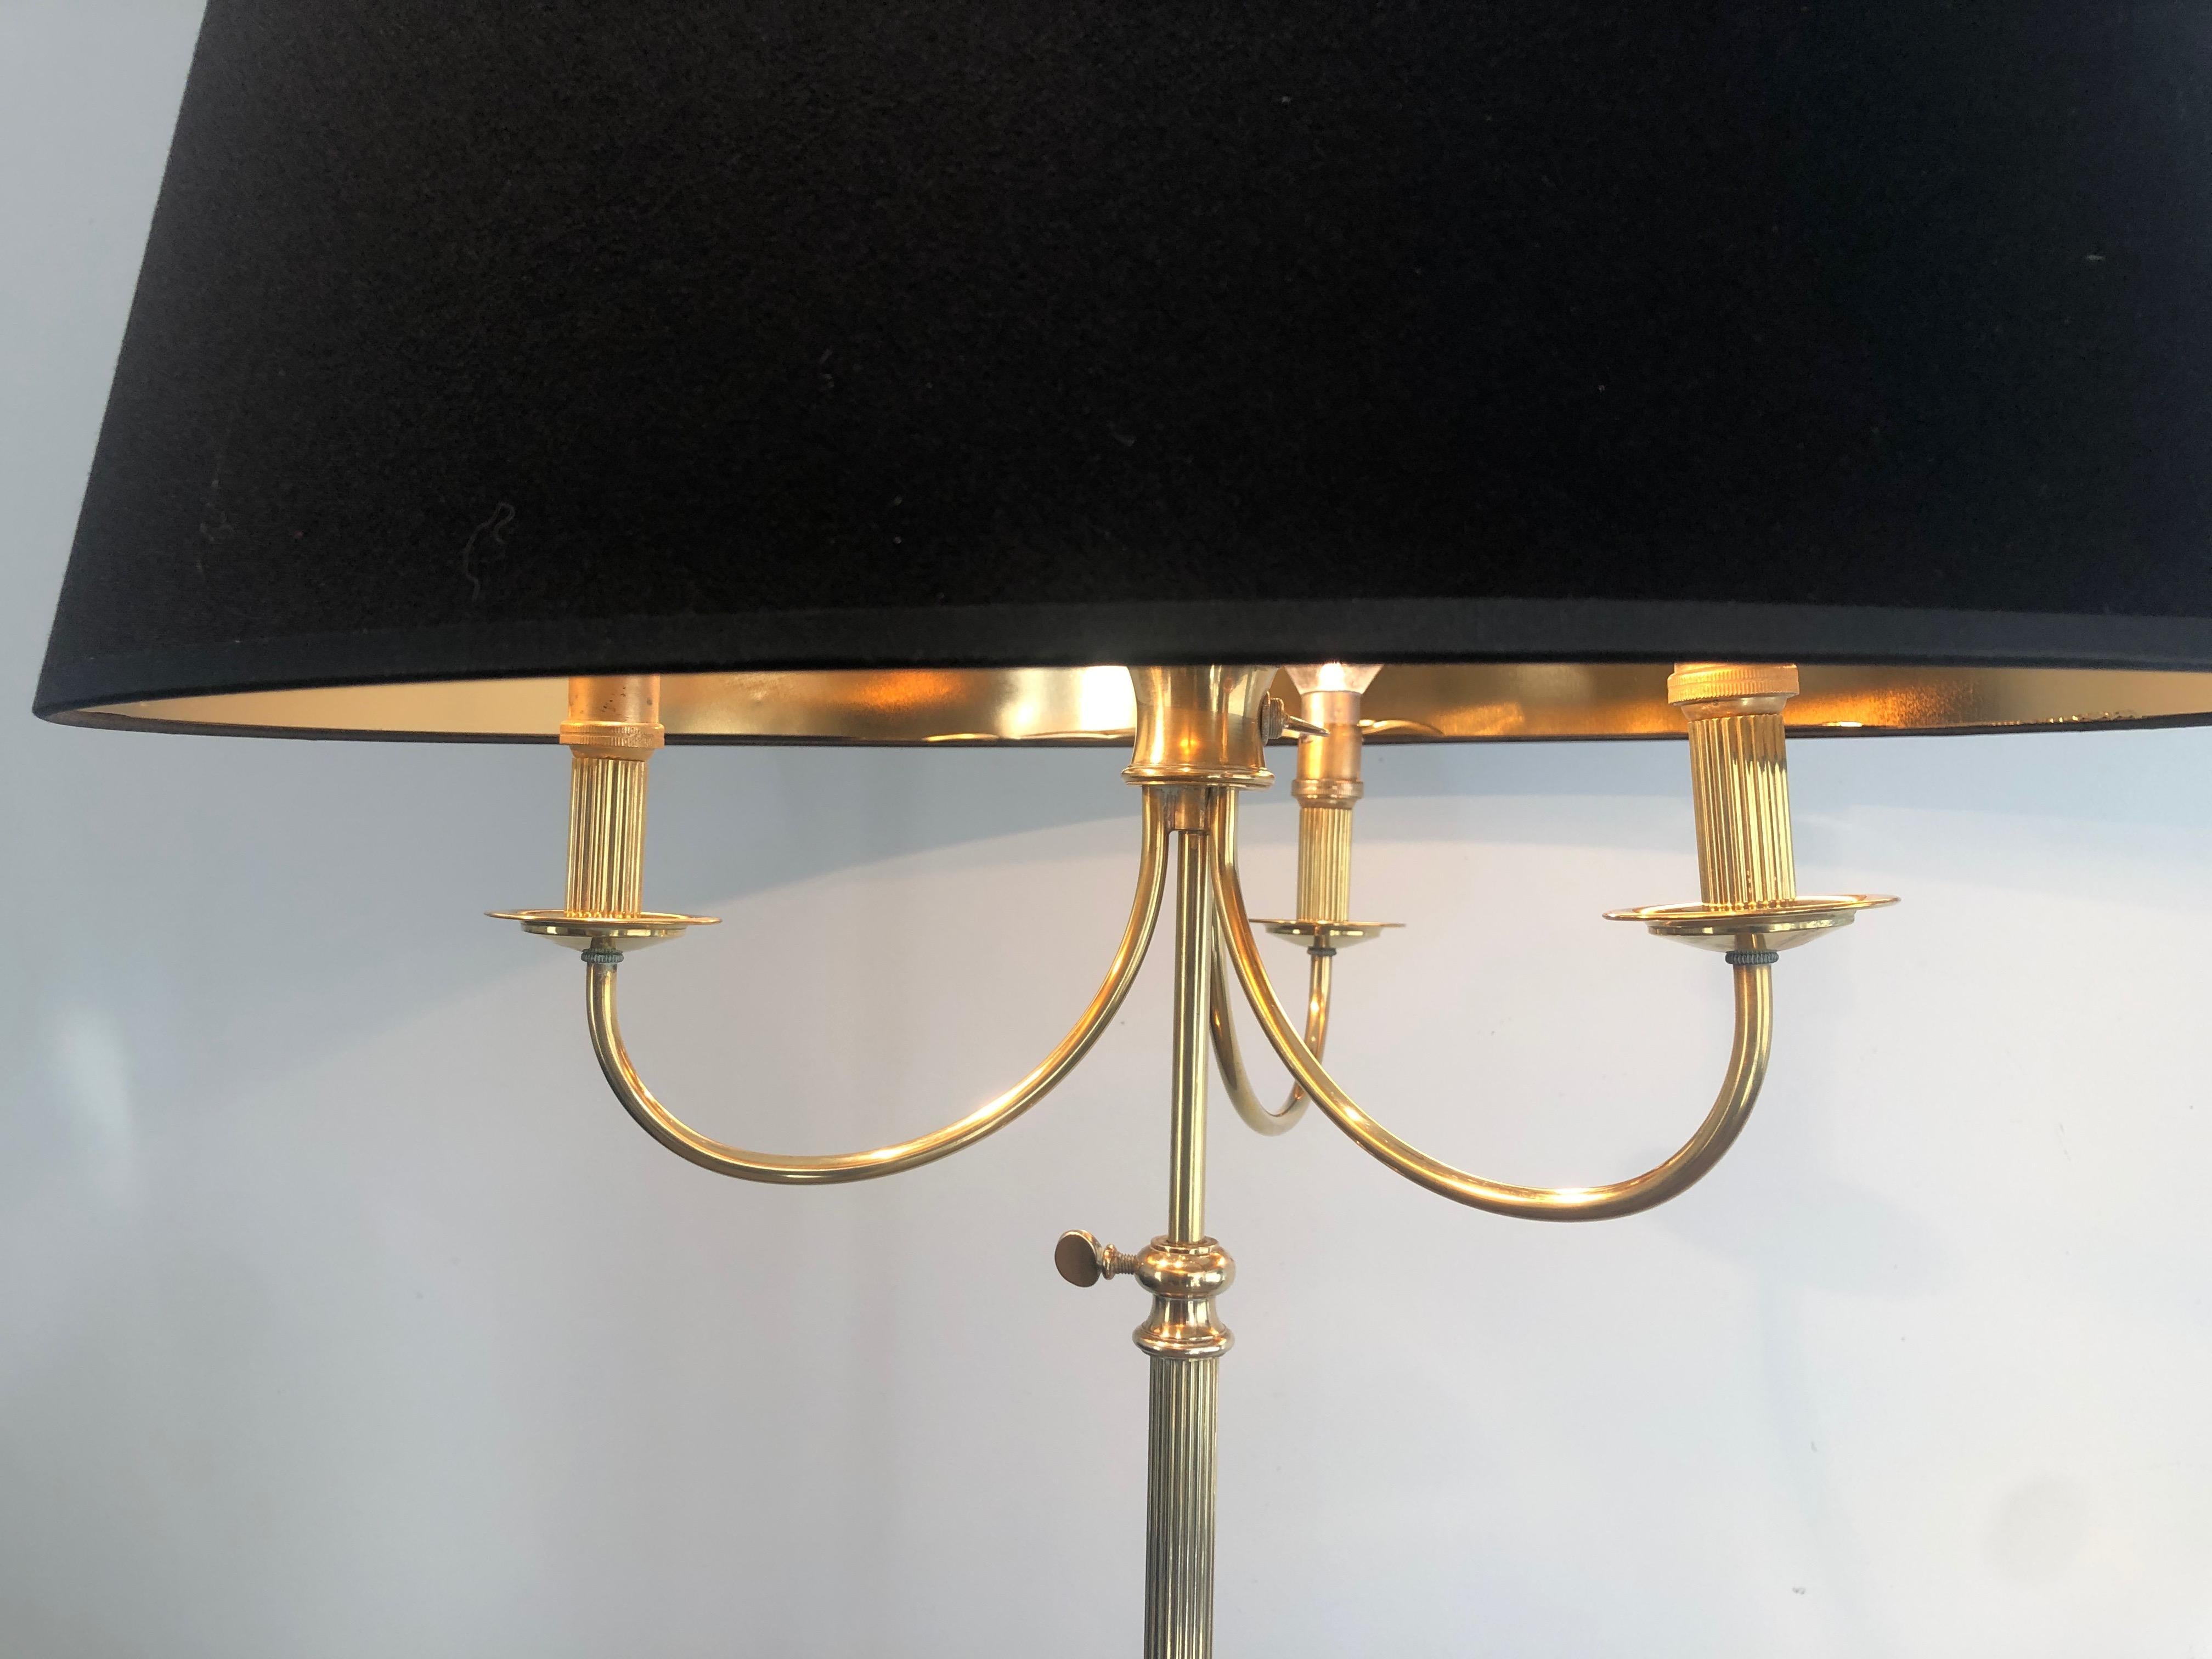 Tripode Brass Floor Lamp with 3 Arms, French Work by Maison Jansen For Sale 1